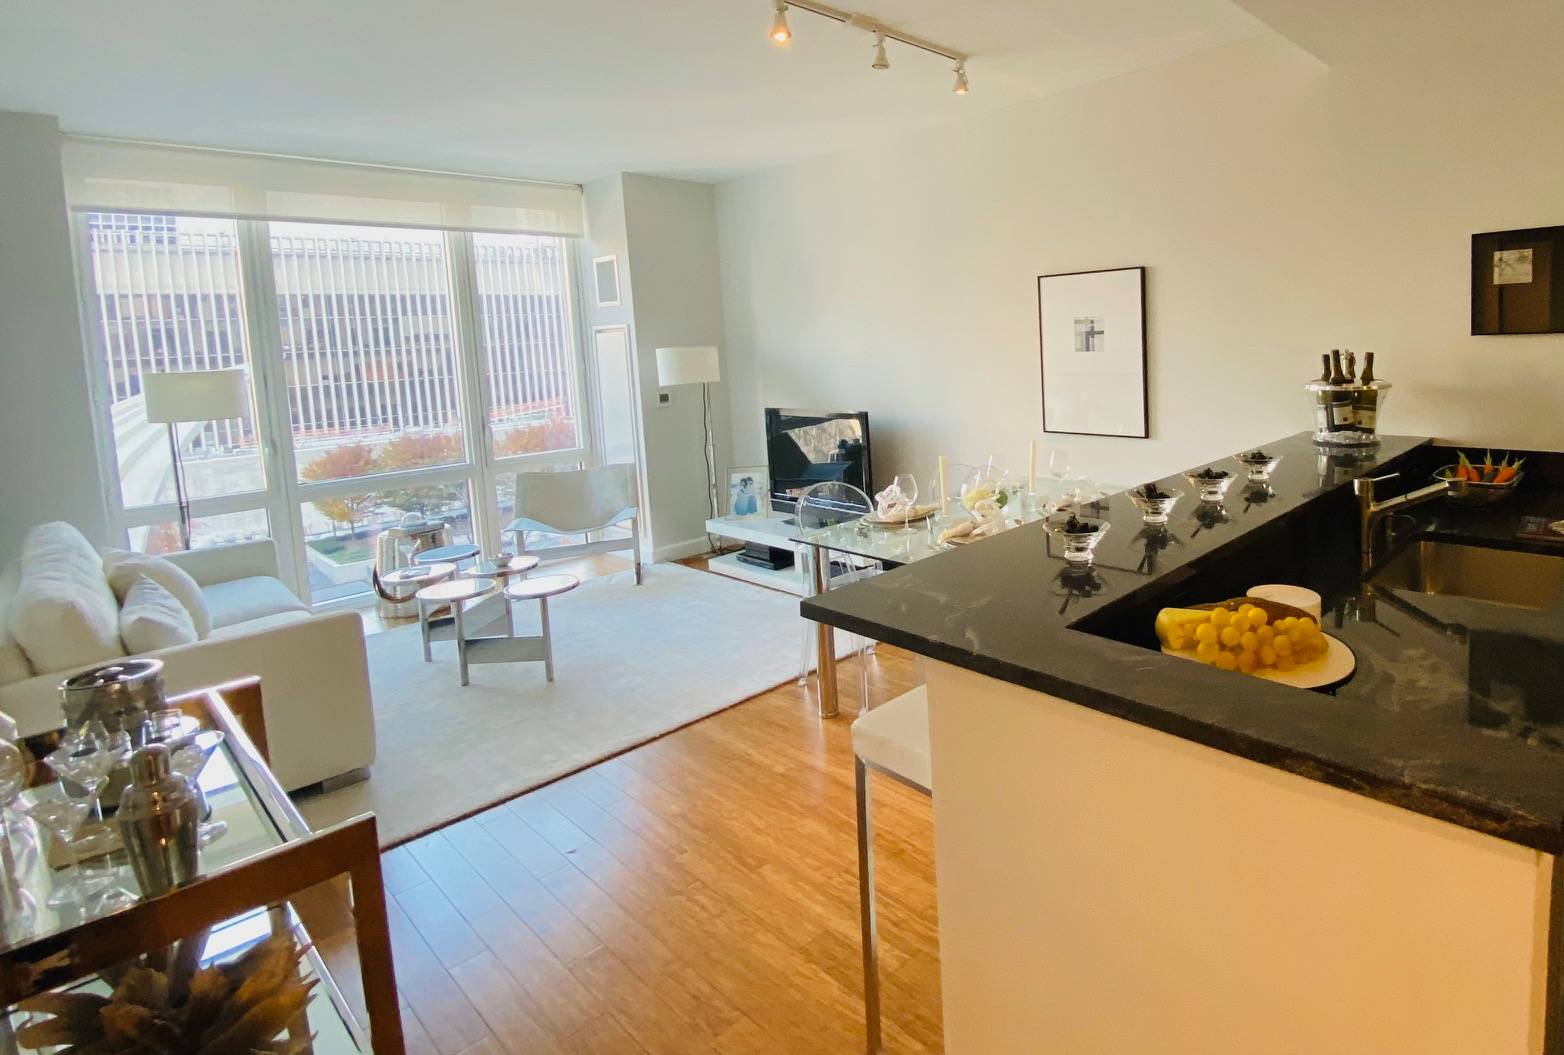 No Fee Luxury 1 Bed/1 Bath Apartment in Lincoln Square, W/D in Unit!